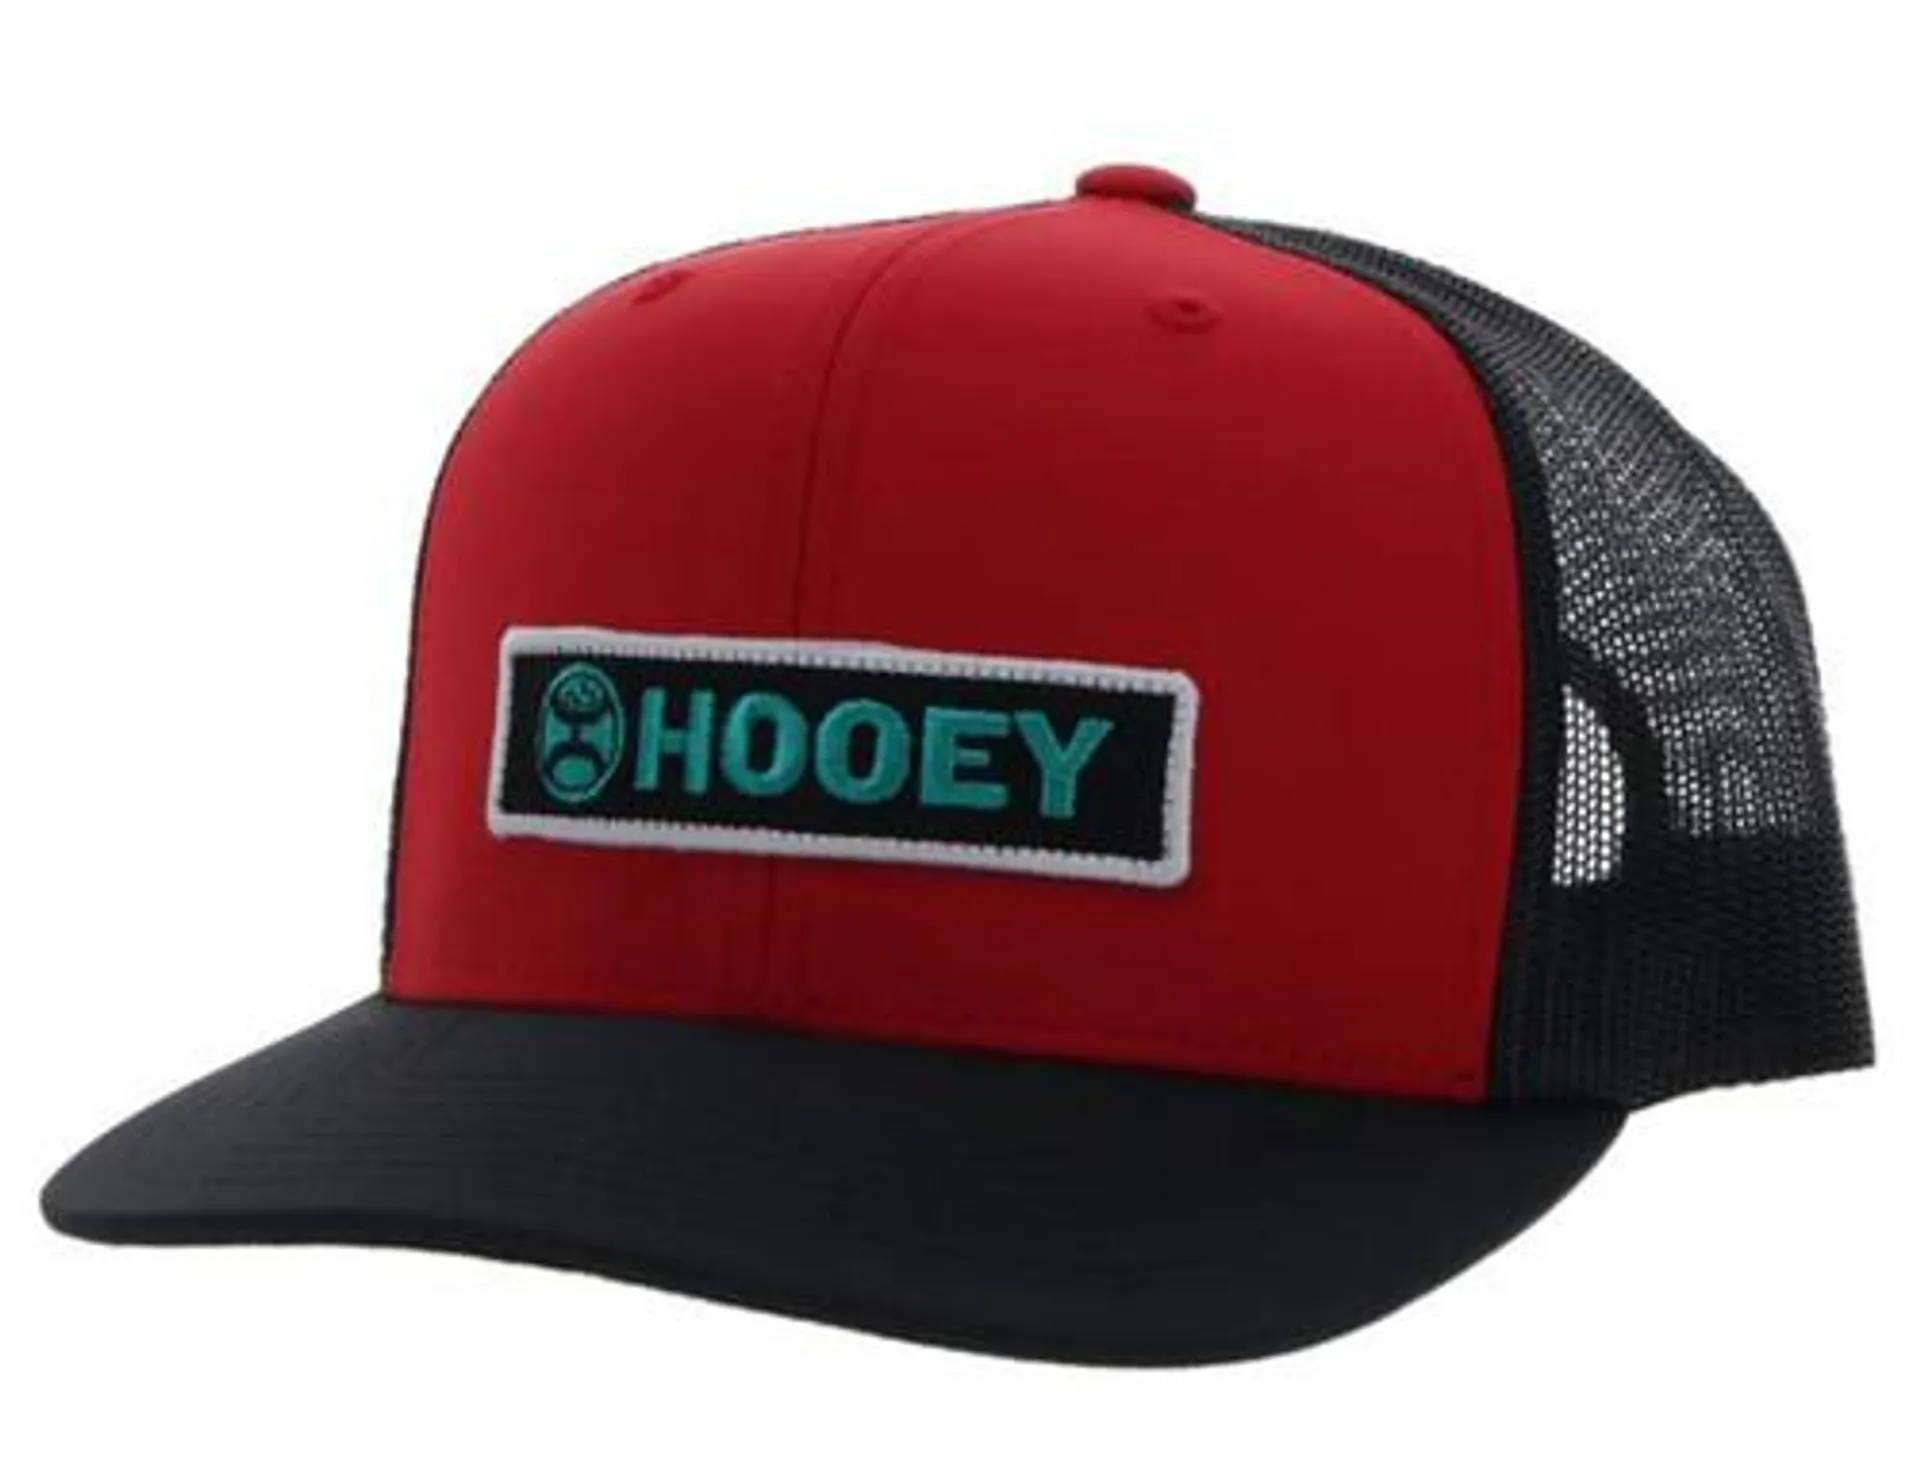 Hooey Men's "Lock-Up" Red/Black with Green/White 6 Panel Cap